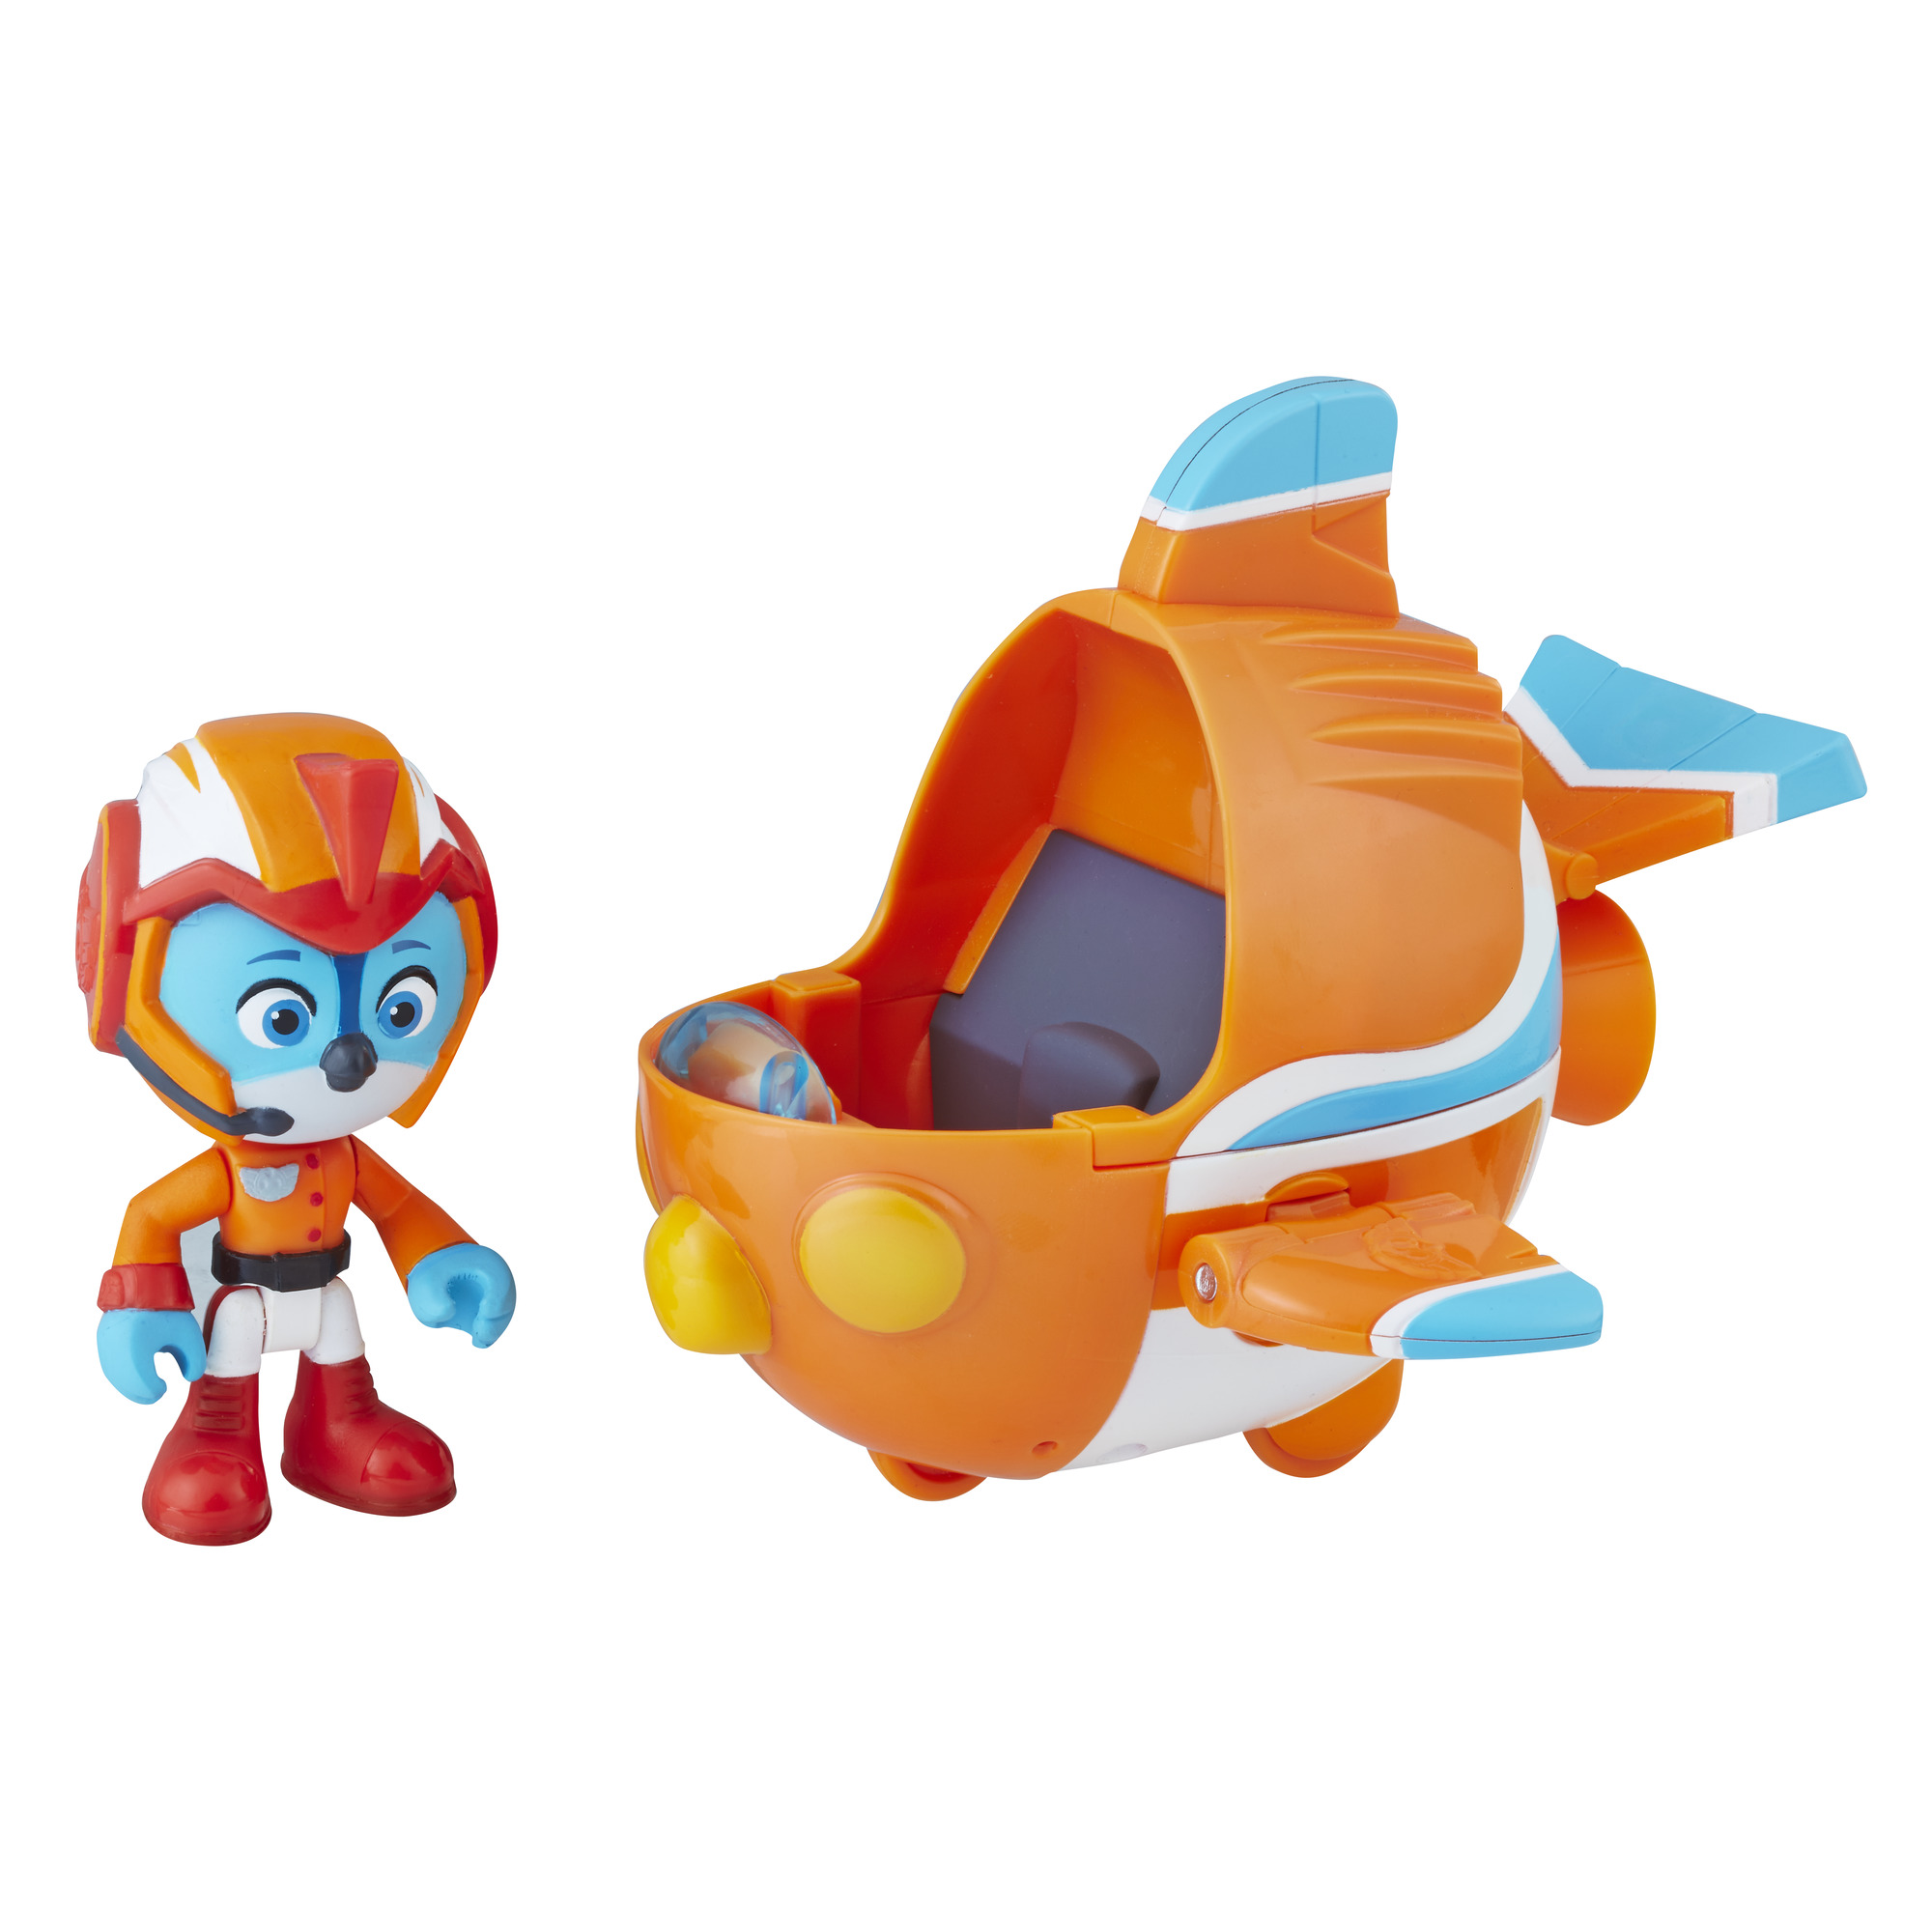 Top Wing Swift figure and vehicle - image 1 of 7